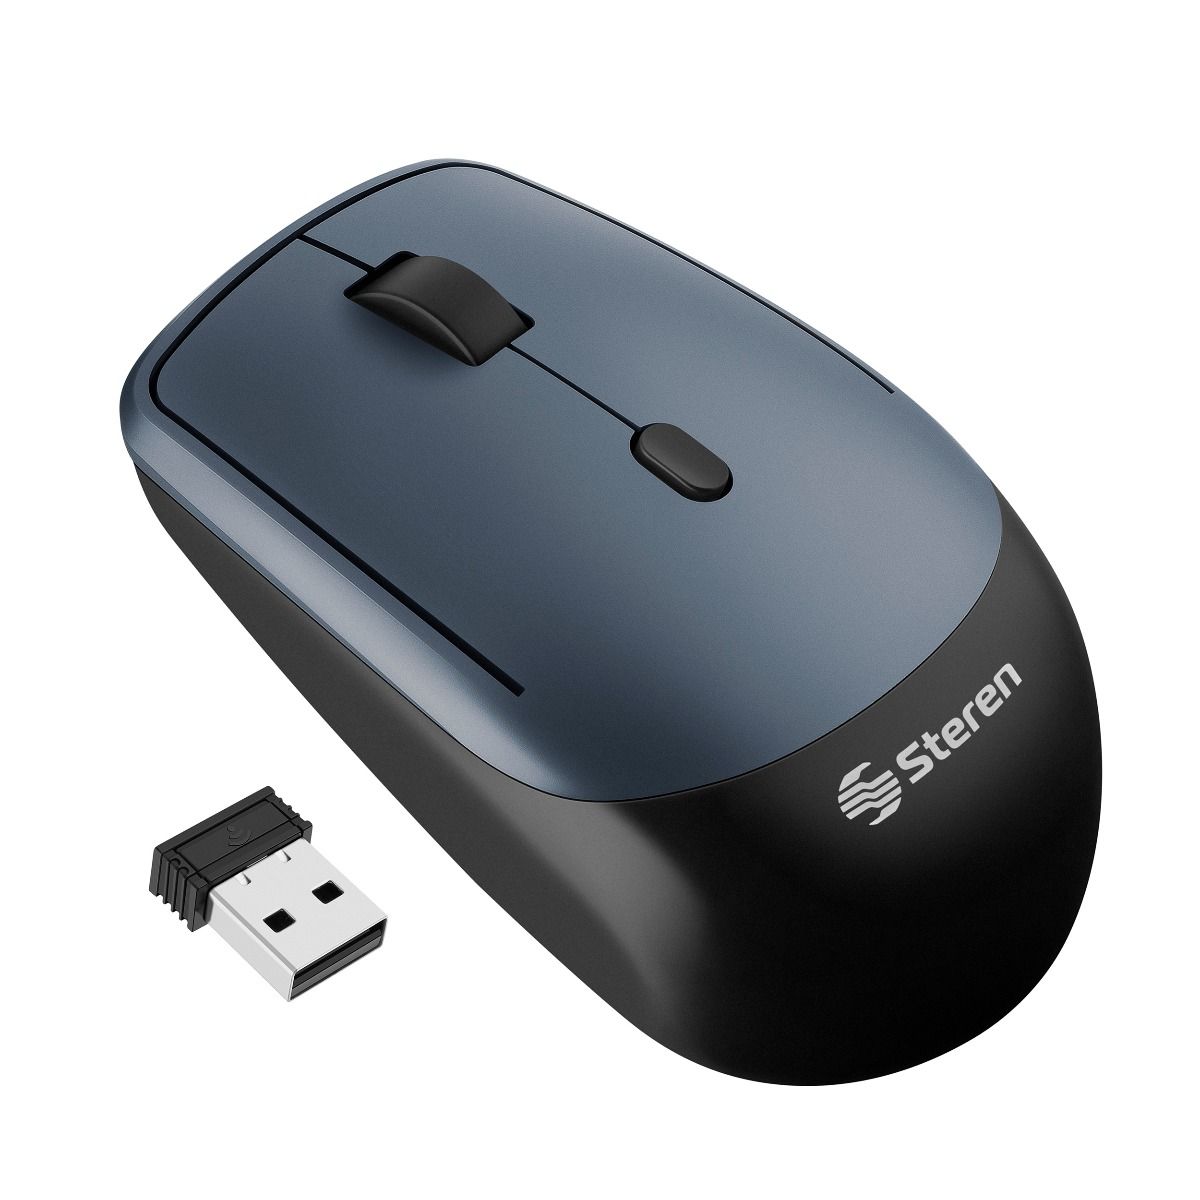 Mouse Bluetooth* / RF, multiequipo 800 / 1200 / 1600 /